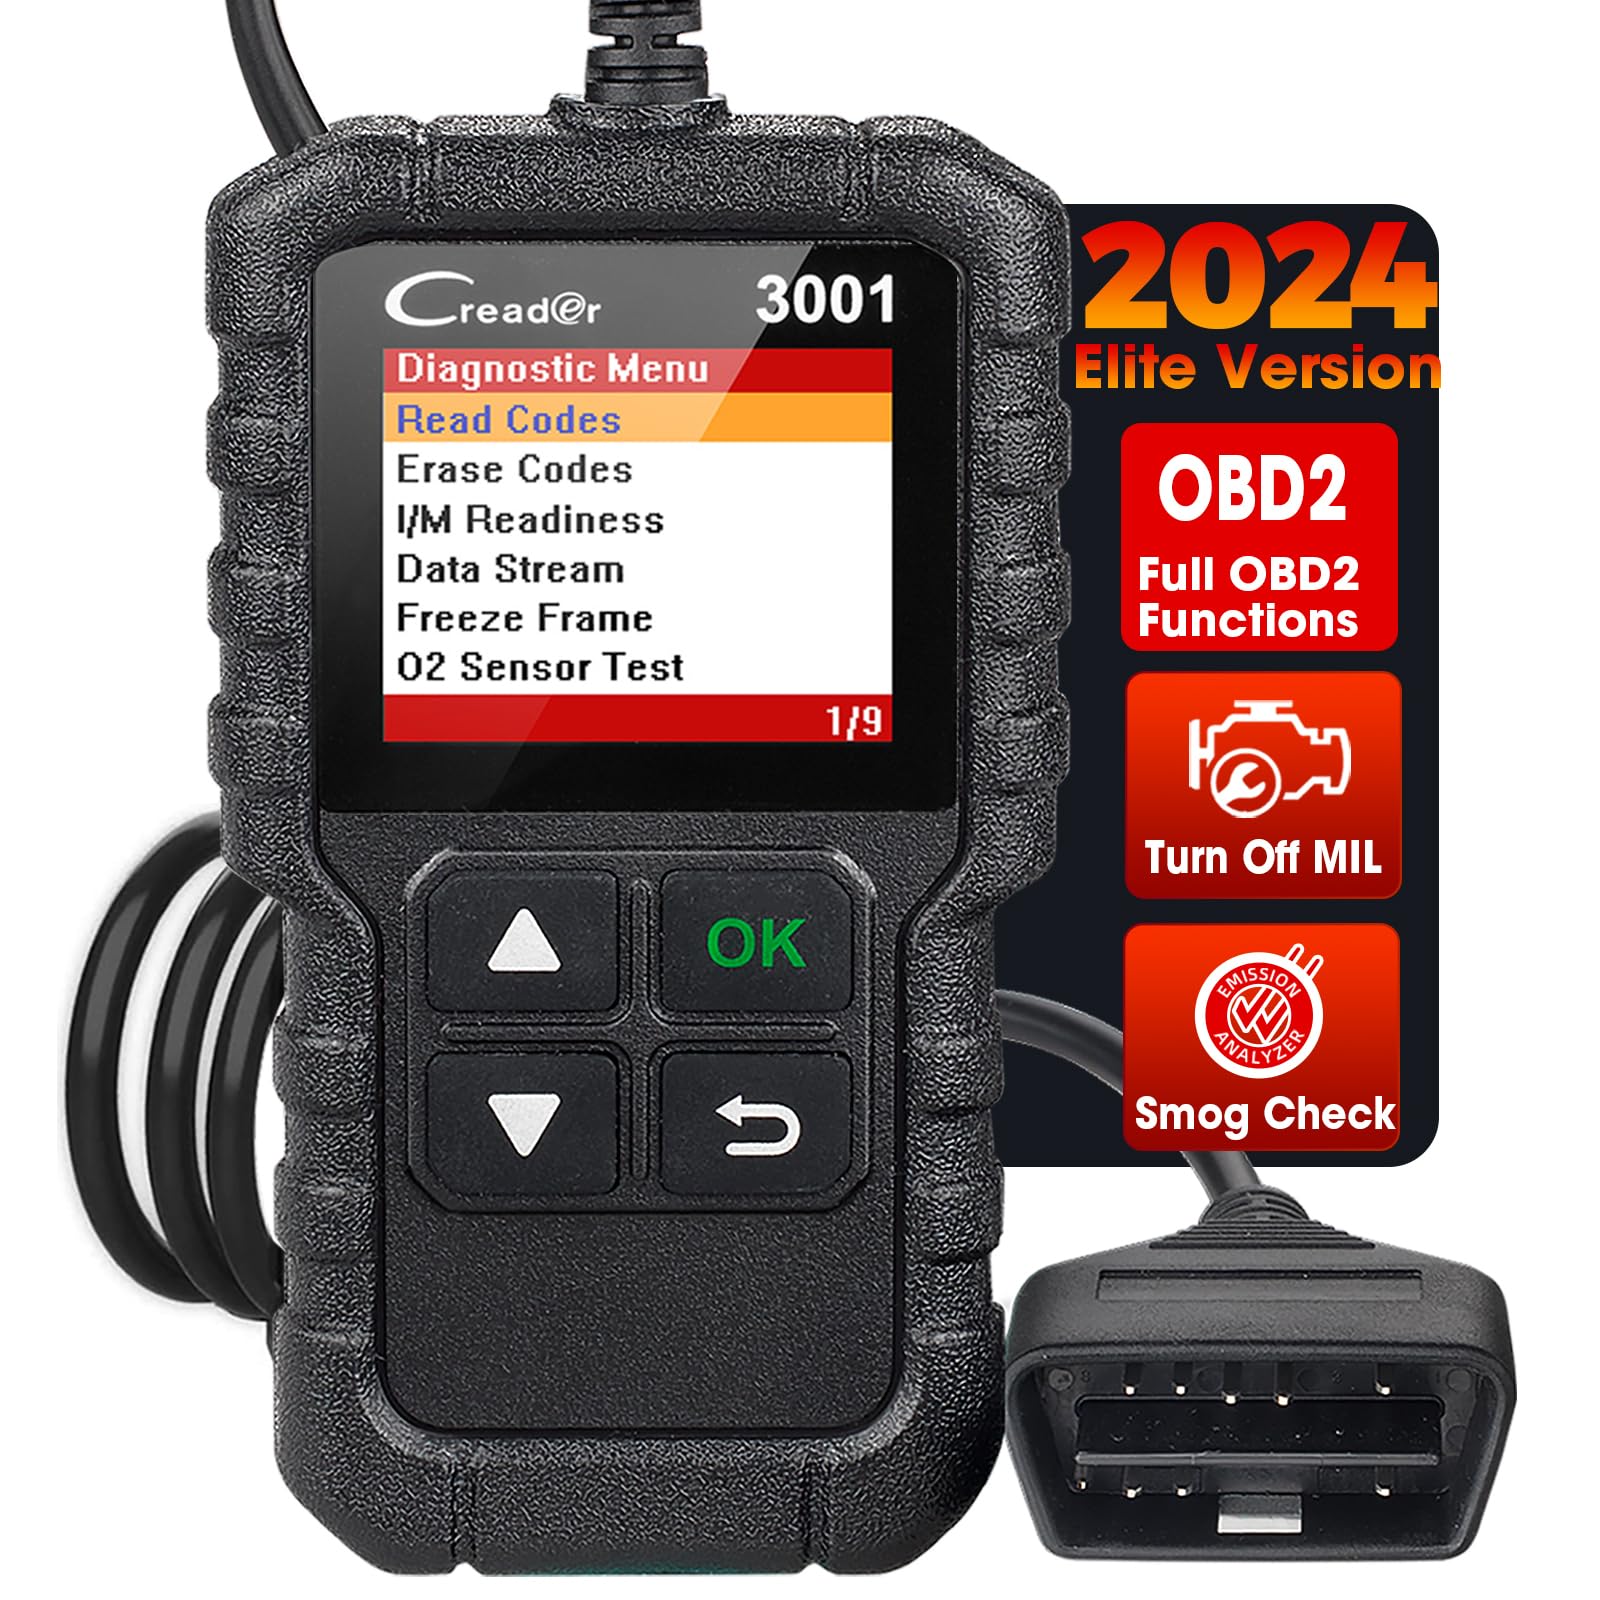 $14.95 LAUNCH Creader 3001 OBD2 Scanner, Engine Fault Code Reader Mode 6 CAN Diagnostic Scan Tool for All OBDII Protocol Cars Since 1996